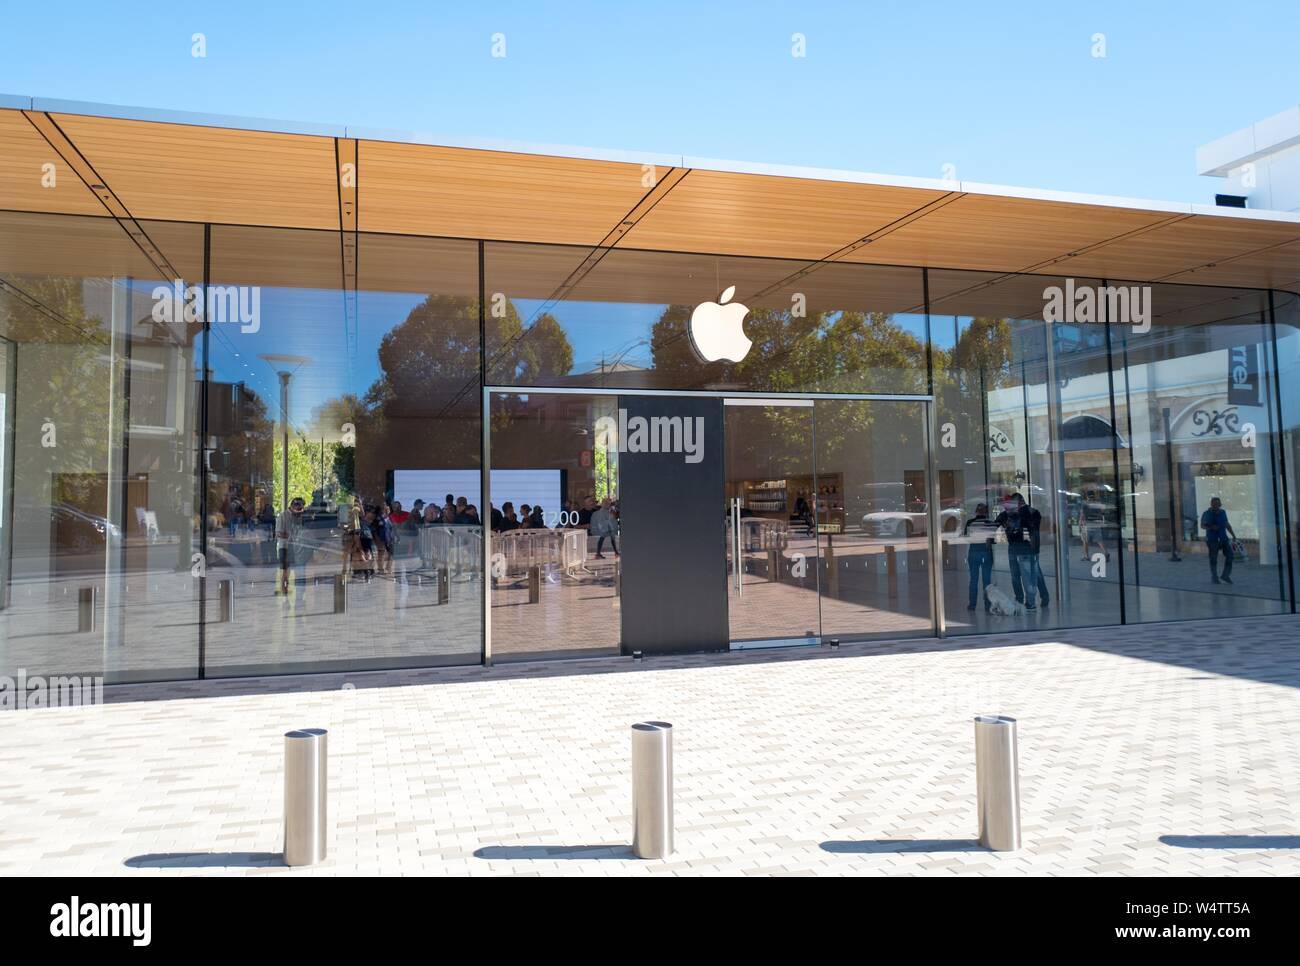 Facade of newly constructed Apple Computers store with logo visible at the luxury Broadway Plaza shopping mall in Walnut Creek, California, October 30, 2018. () Stock Photo